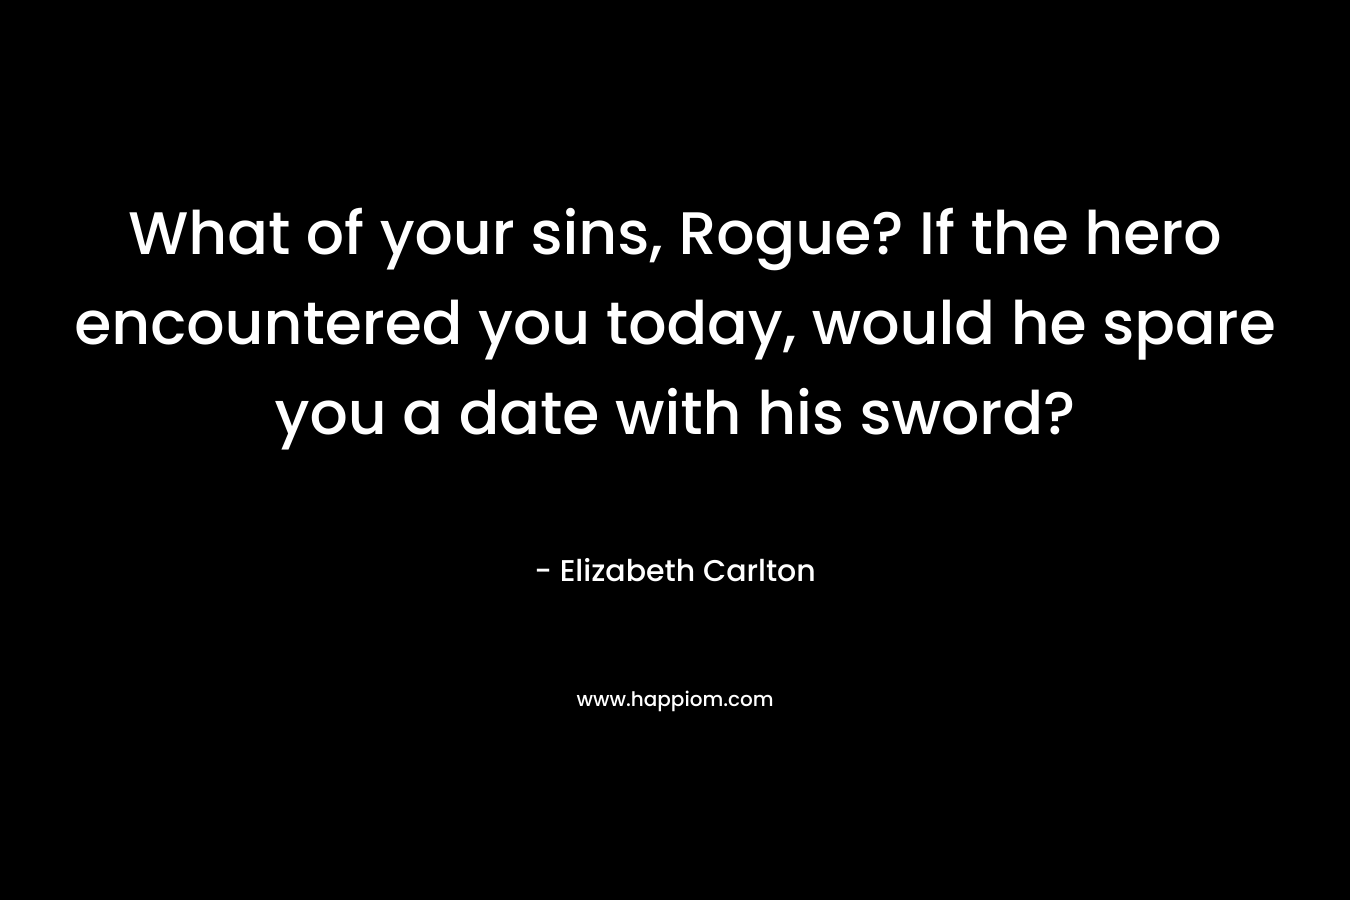 What of your sins, Rogue? If the hero encountered you today, would he spare you a date with his sword?